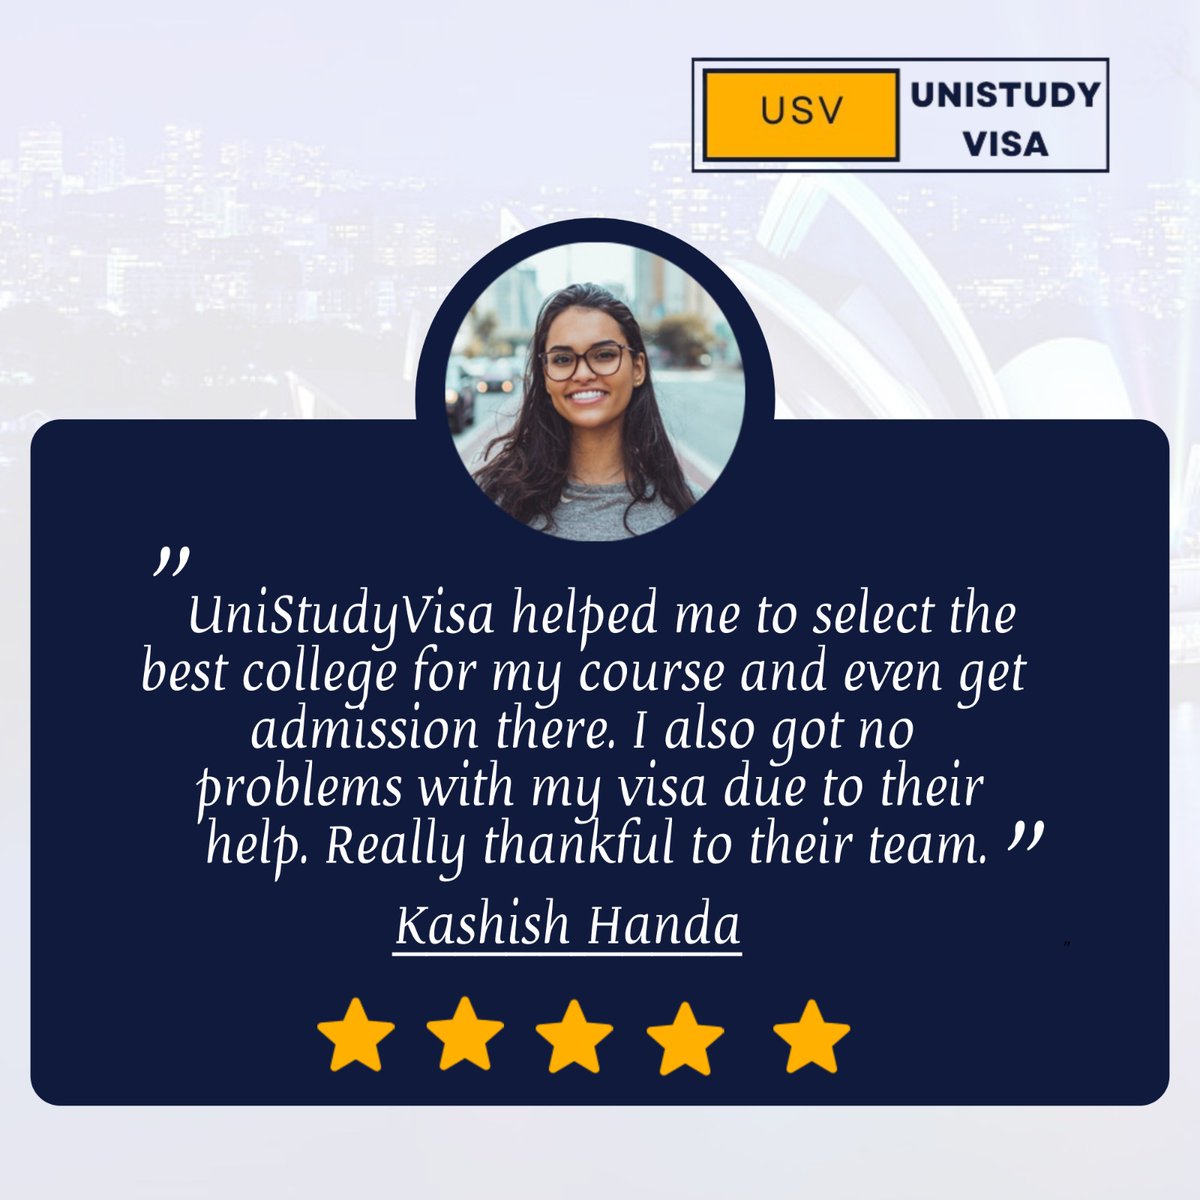 Your Story is Our Pride
Special Thanks

We wish all the best for your future!

Contact Us Now: unistudyvisa.com
#unistudyvisa  #Ourpeople #OurPride #StudyAbroad  #MoreThanStudy  #StudyRecommendations #Educational #QualityEducation #EducationMatters #GlobalEducation